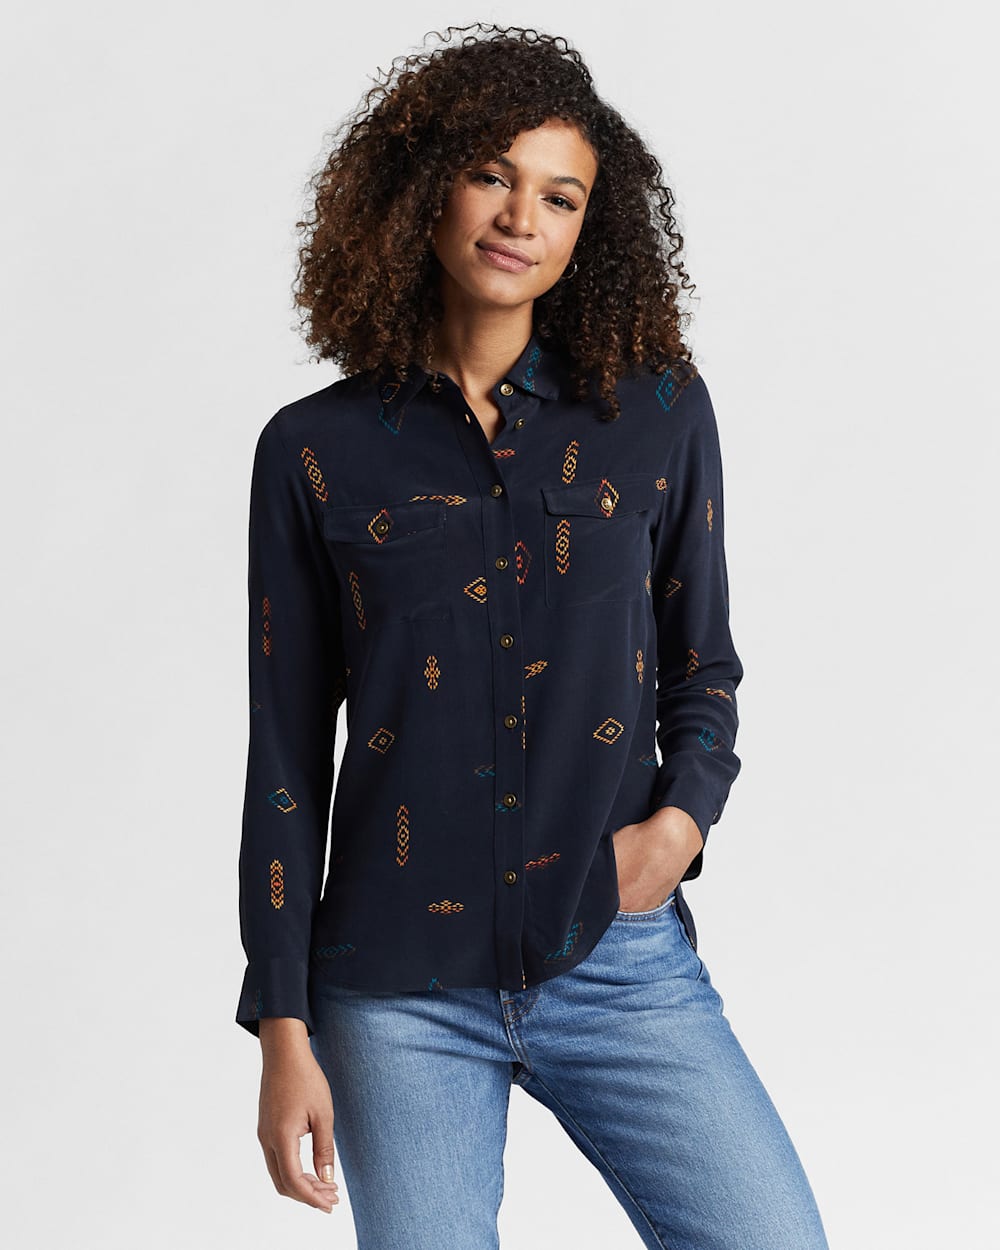 ALTERNATE VIEW OF WOMEN'S WASHABLE TWO POCKET SILK SHIRT IN MIDNIGHT NAVY MULTI image number 5